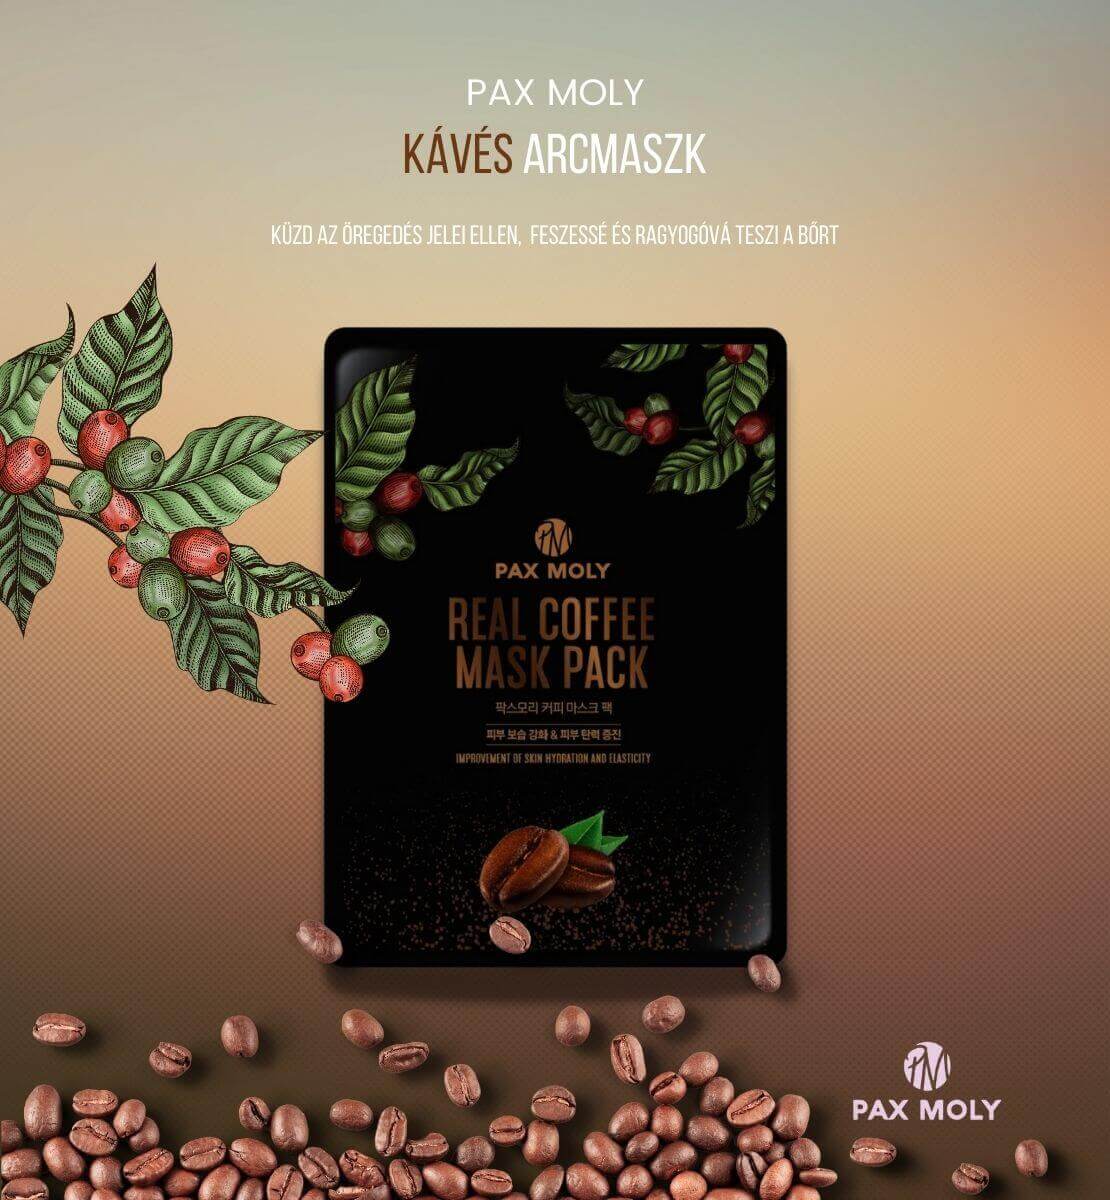 PAXMOLY-Real-Coffee-kaves-arcmaszk